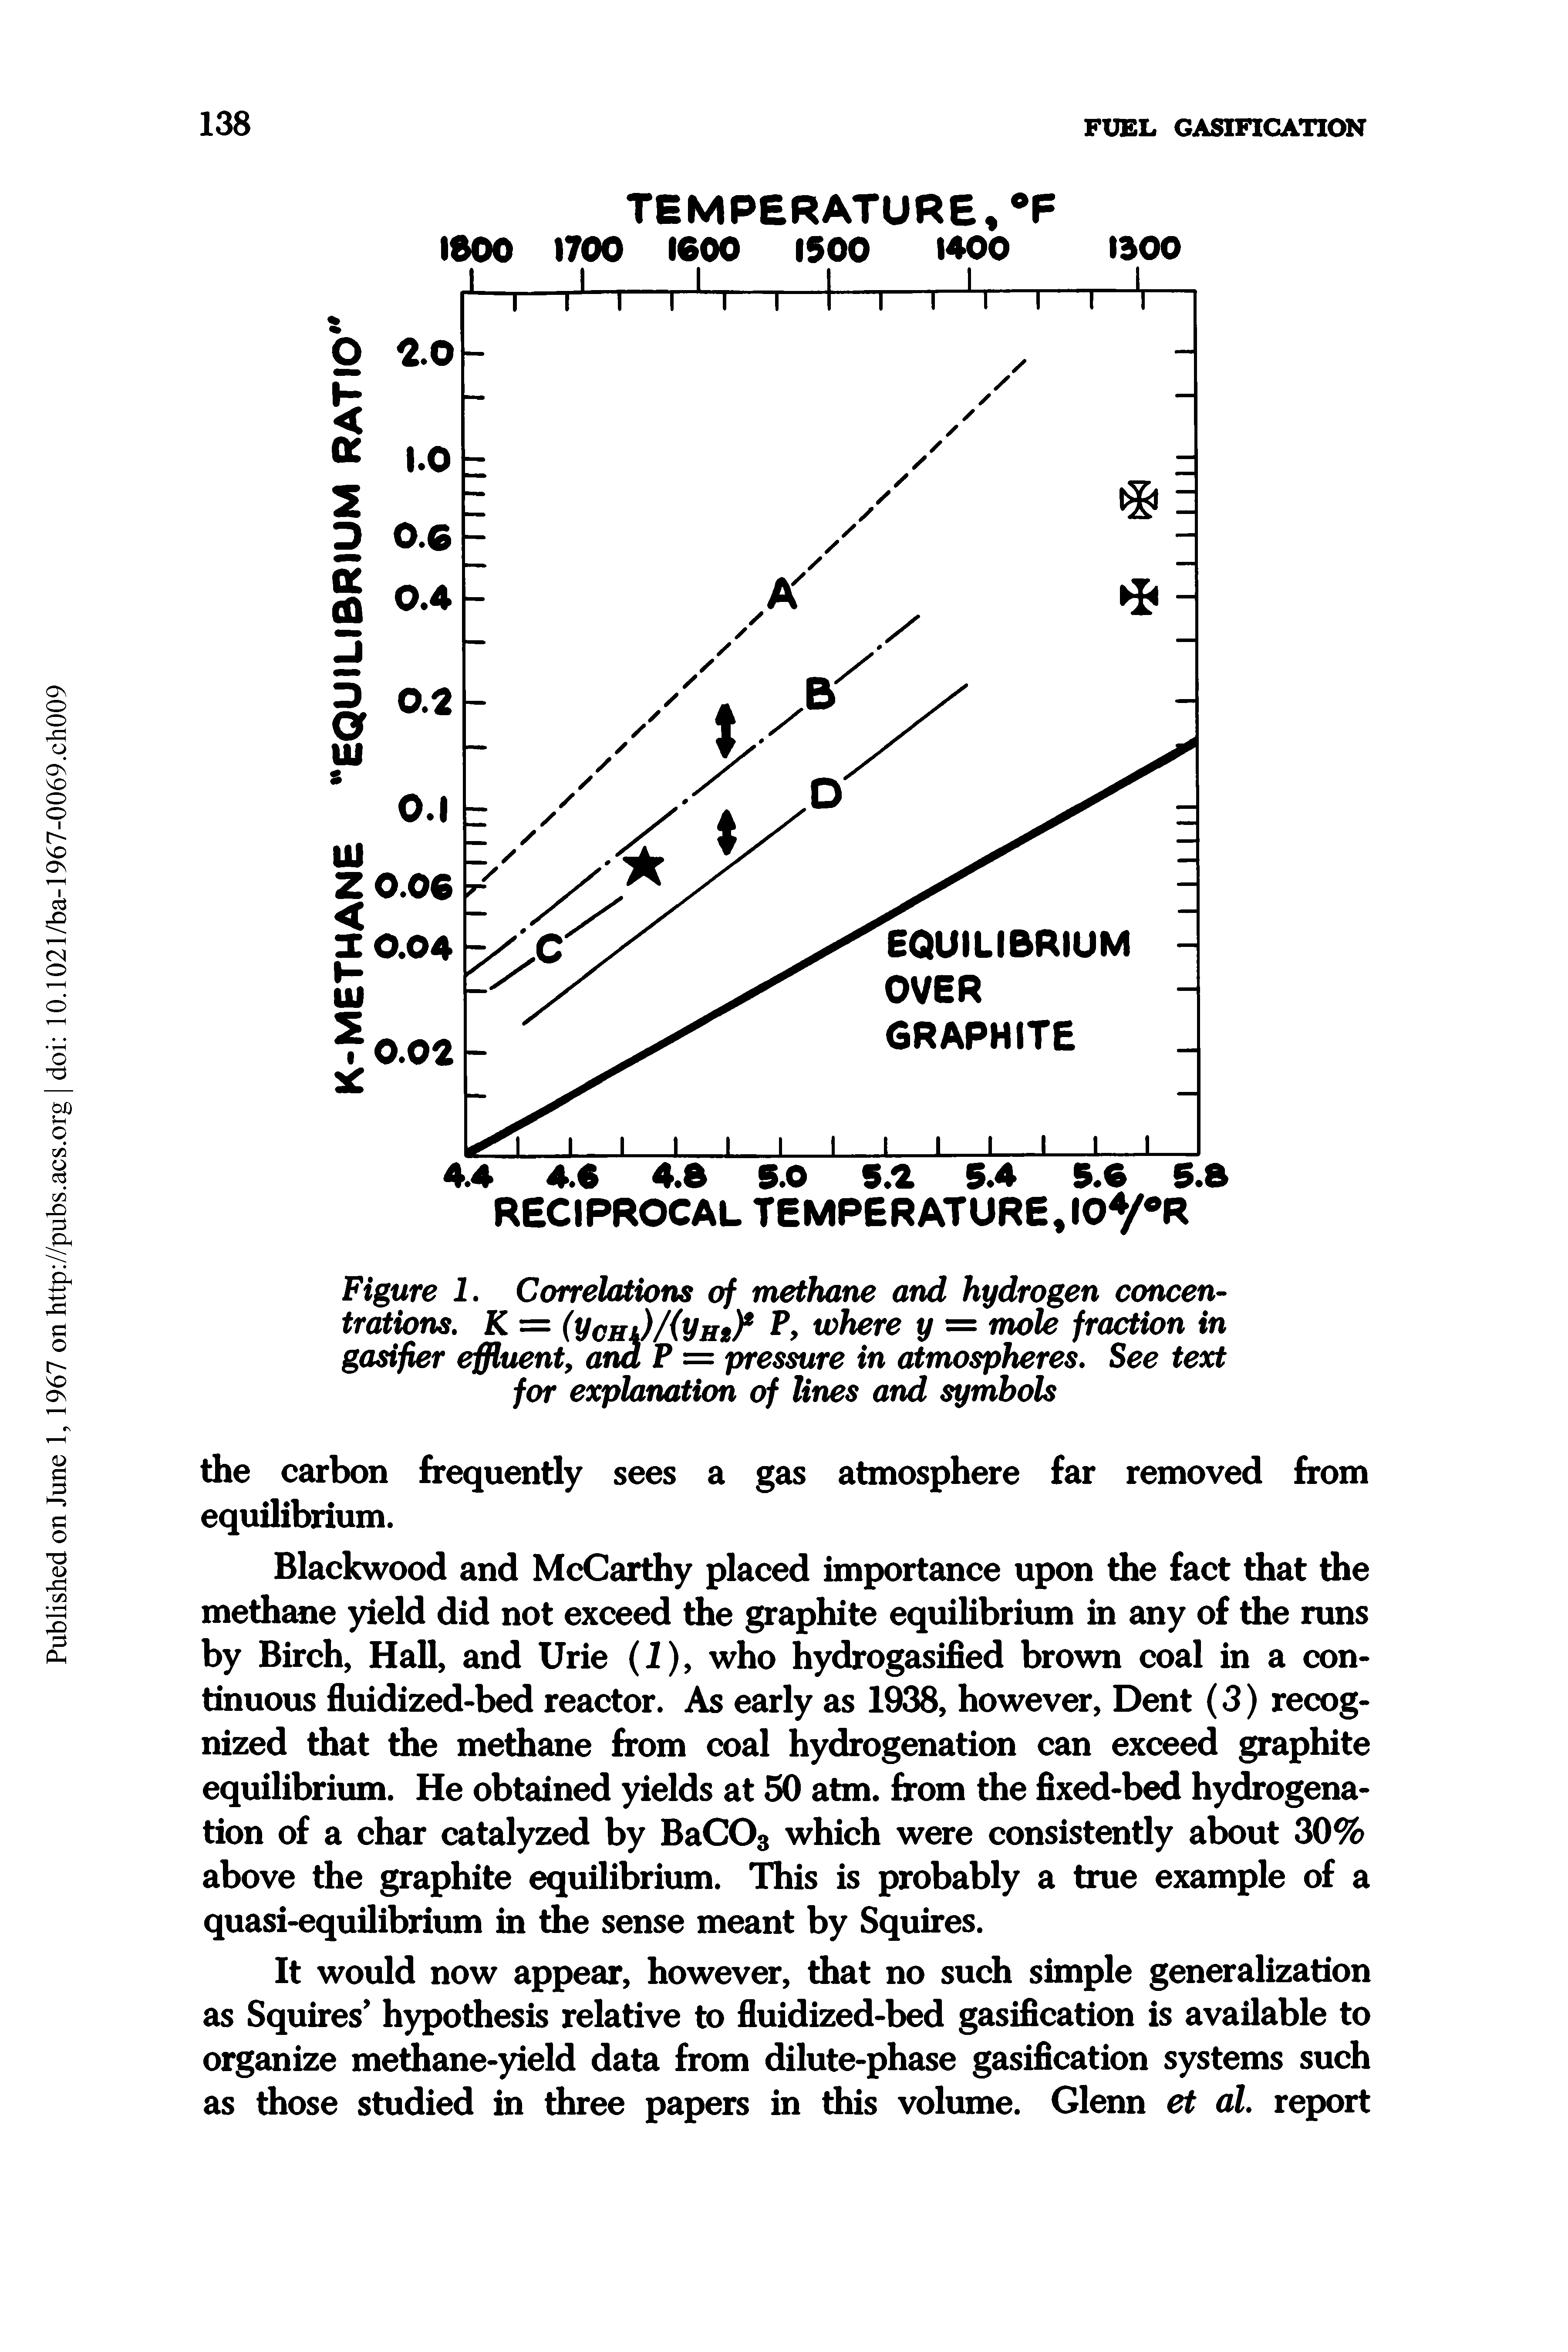 Figure 1. Correlations of methane and hydrogen concentrations. K = (ycHJk)/(ym) where y = mole fraction in gasifier effluent, ana P = pressure in atmospheres. See text for explanation of lines and symbols...